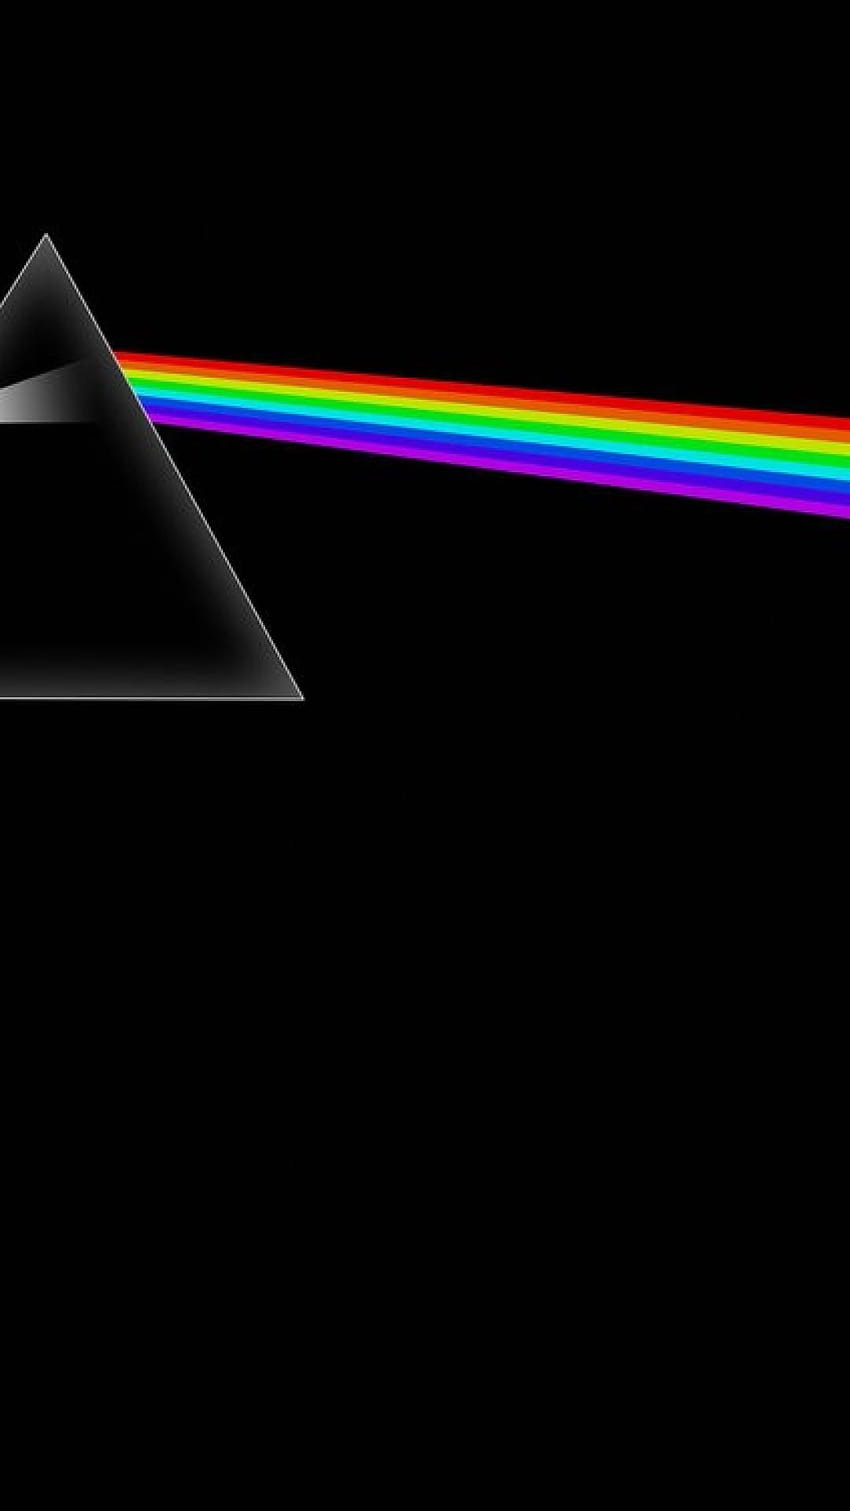 The Dark Side of the Moon marks its 50th anniversary